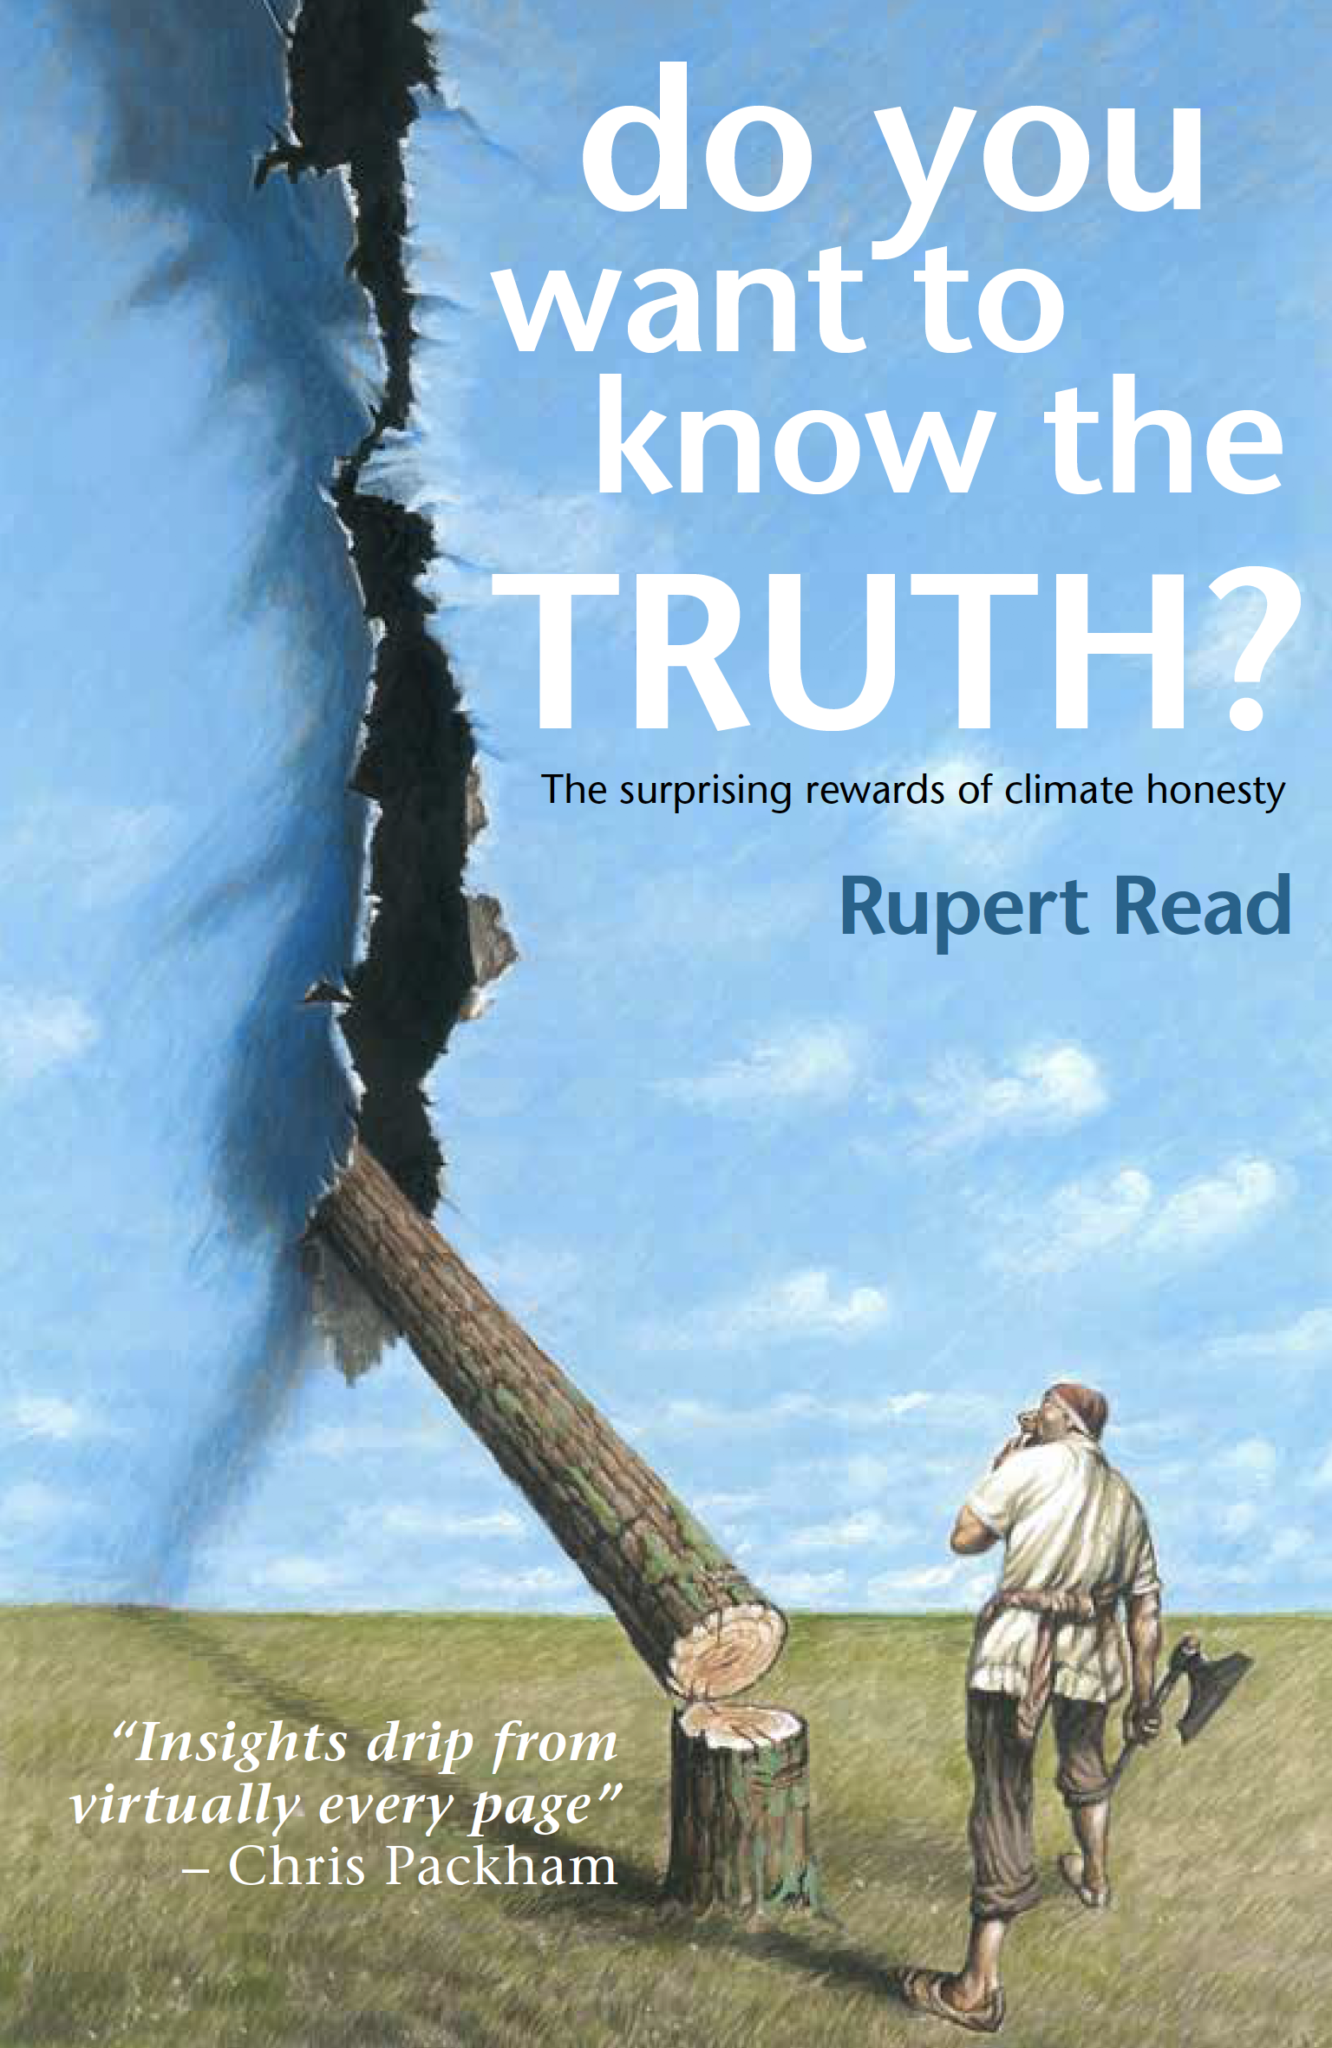 Book Cover showing tree falling through the sky taring the paper of painting canvas with text "Do You Want to Know the Truth? The surprising rewards of climate honesty" and "Insights drip from virtually every page - Chris Packham"